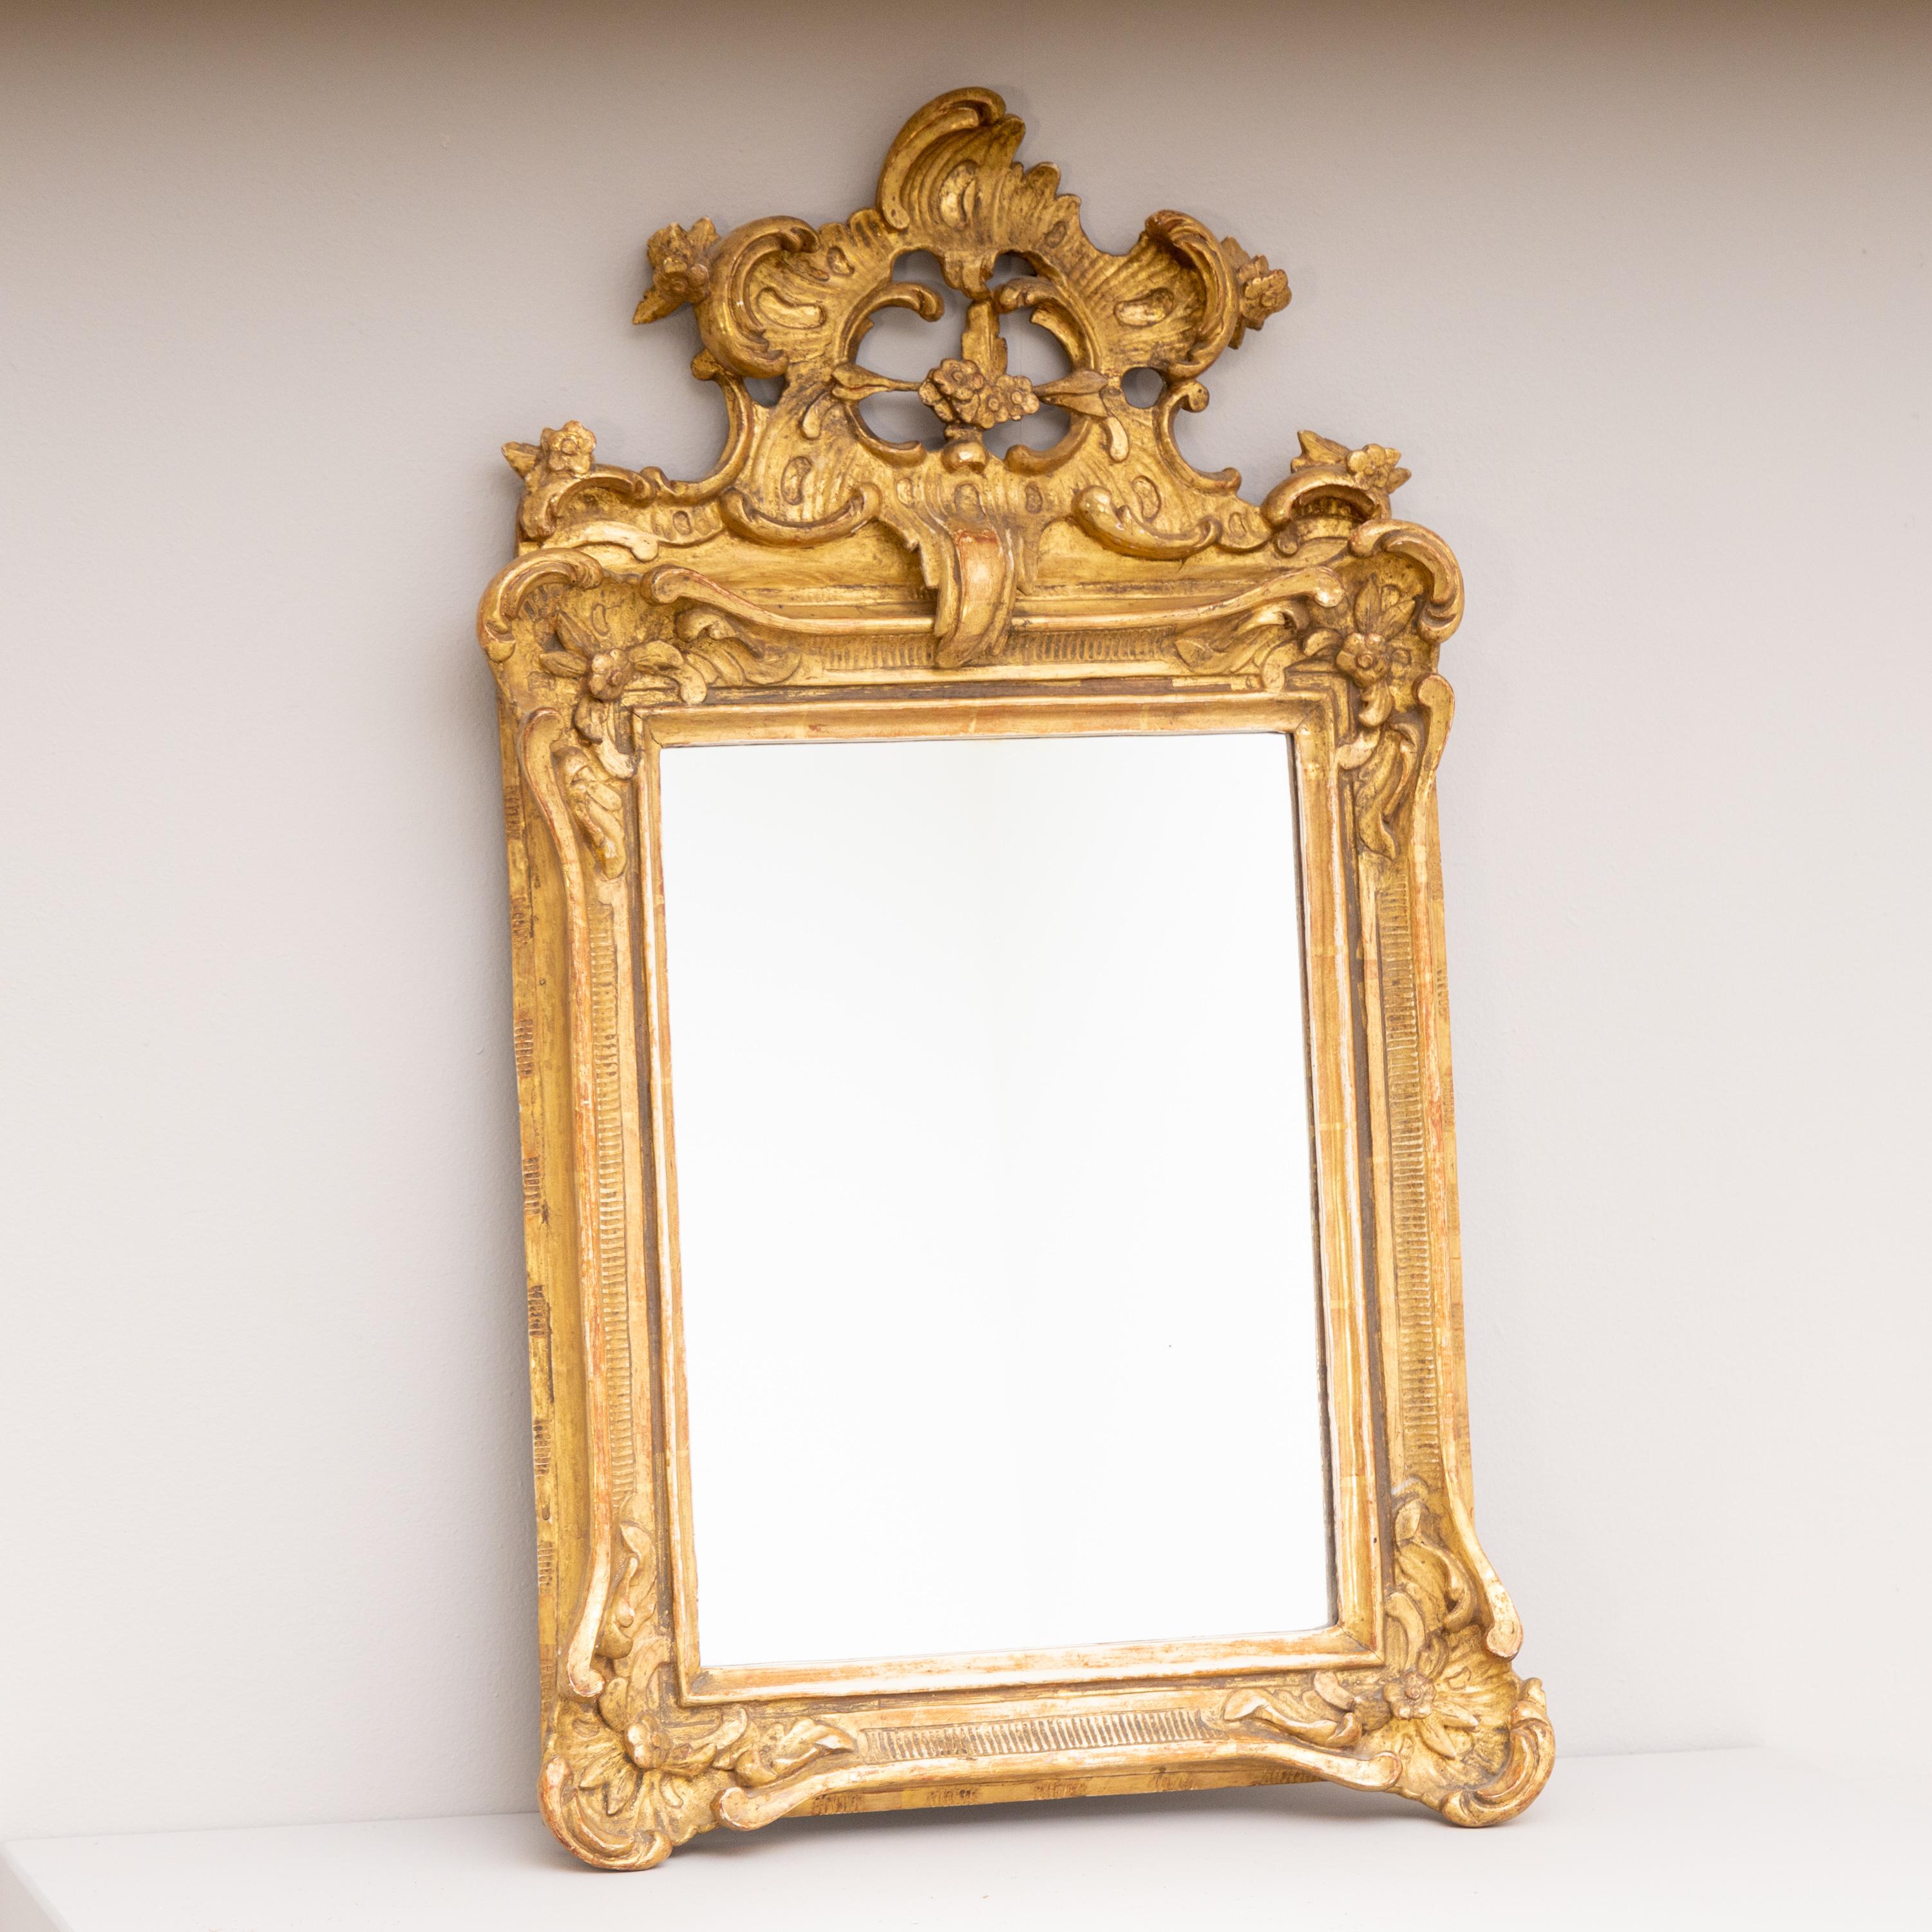 Small wall mirror with asymmetrical rocaille decoration and gold patinated frame.